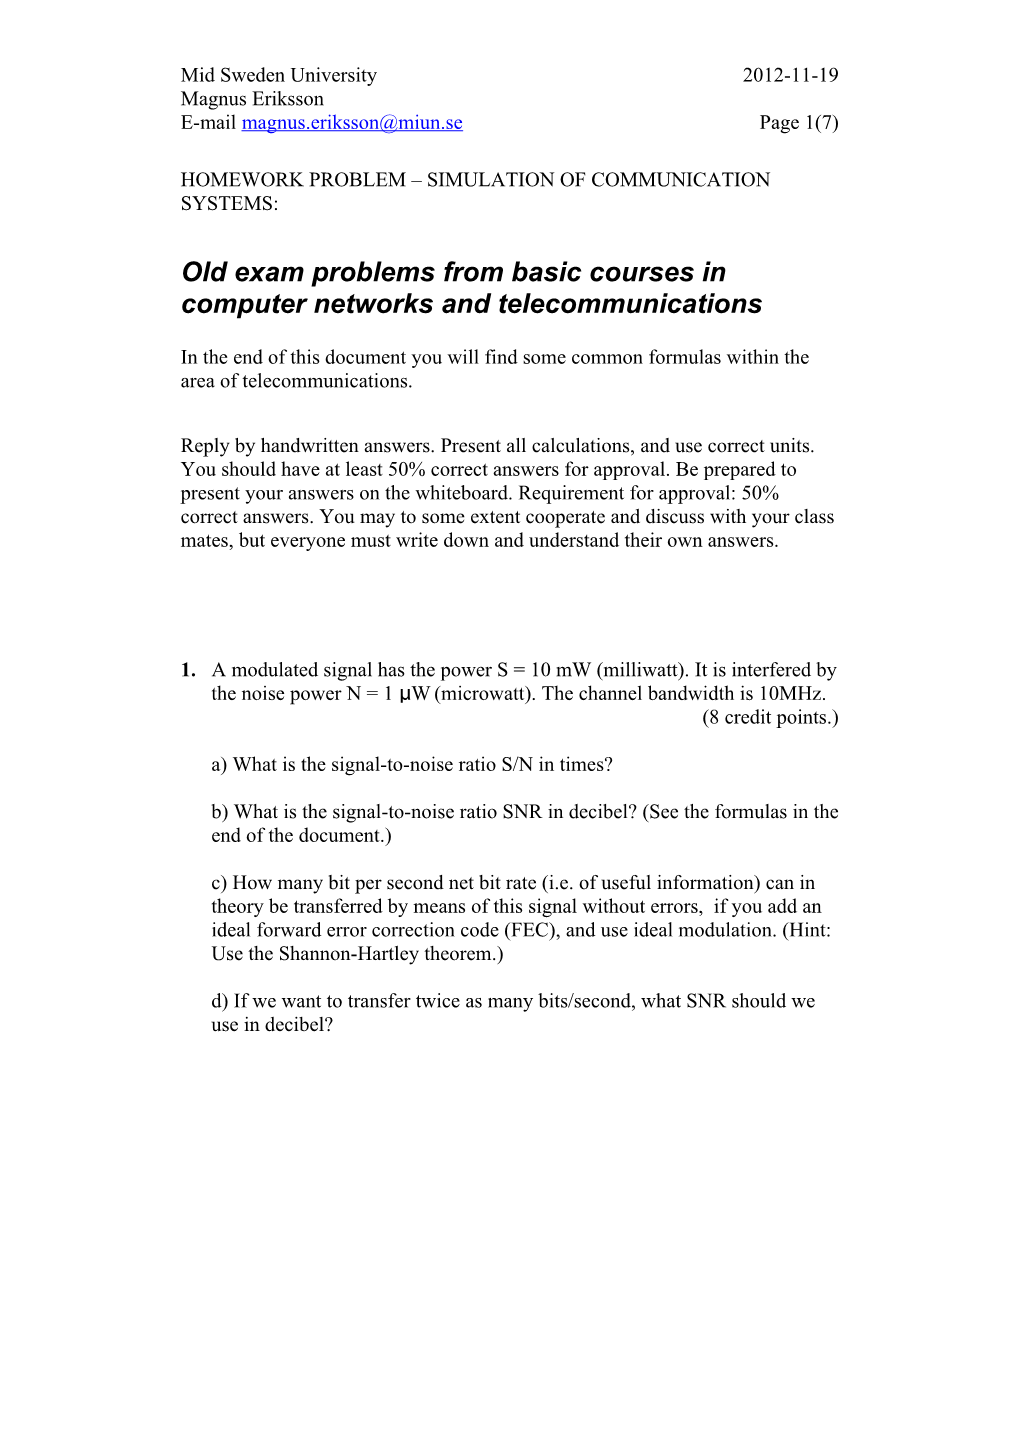 Old Exam Problems from Basic Courses in Computer Networks and Telecommunications